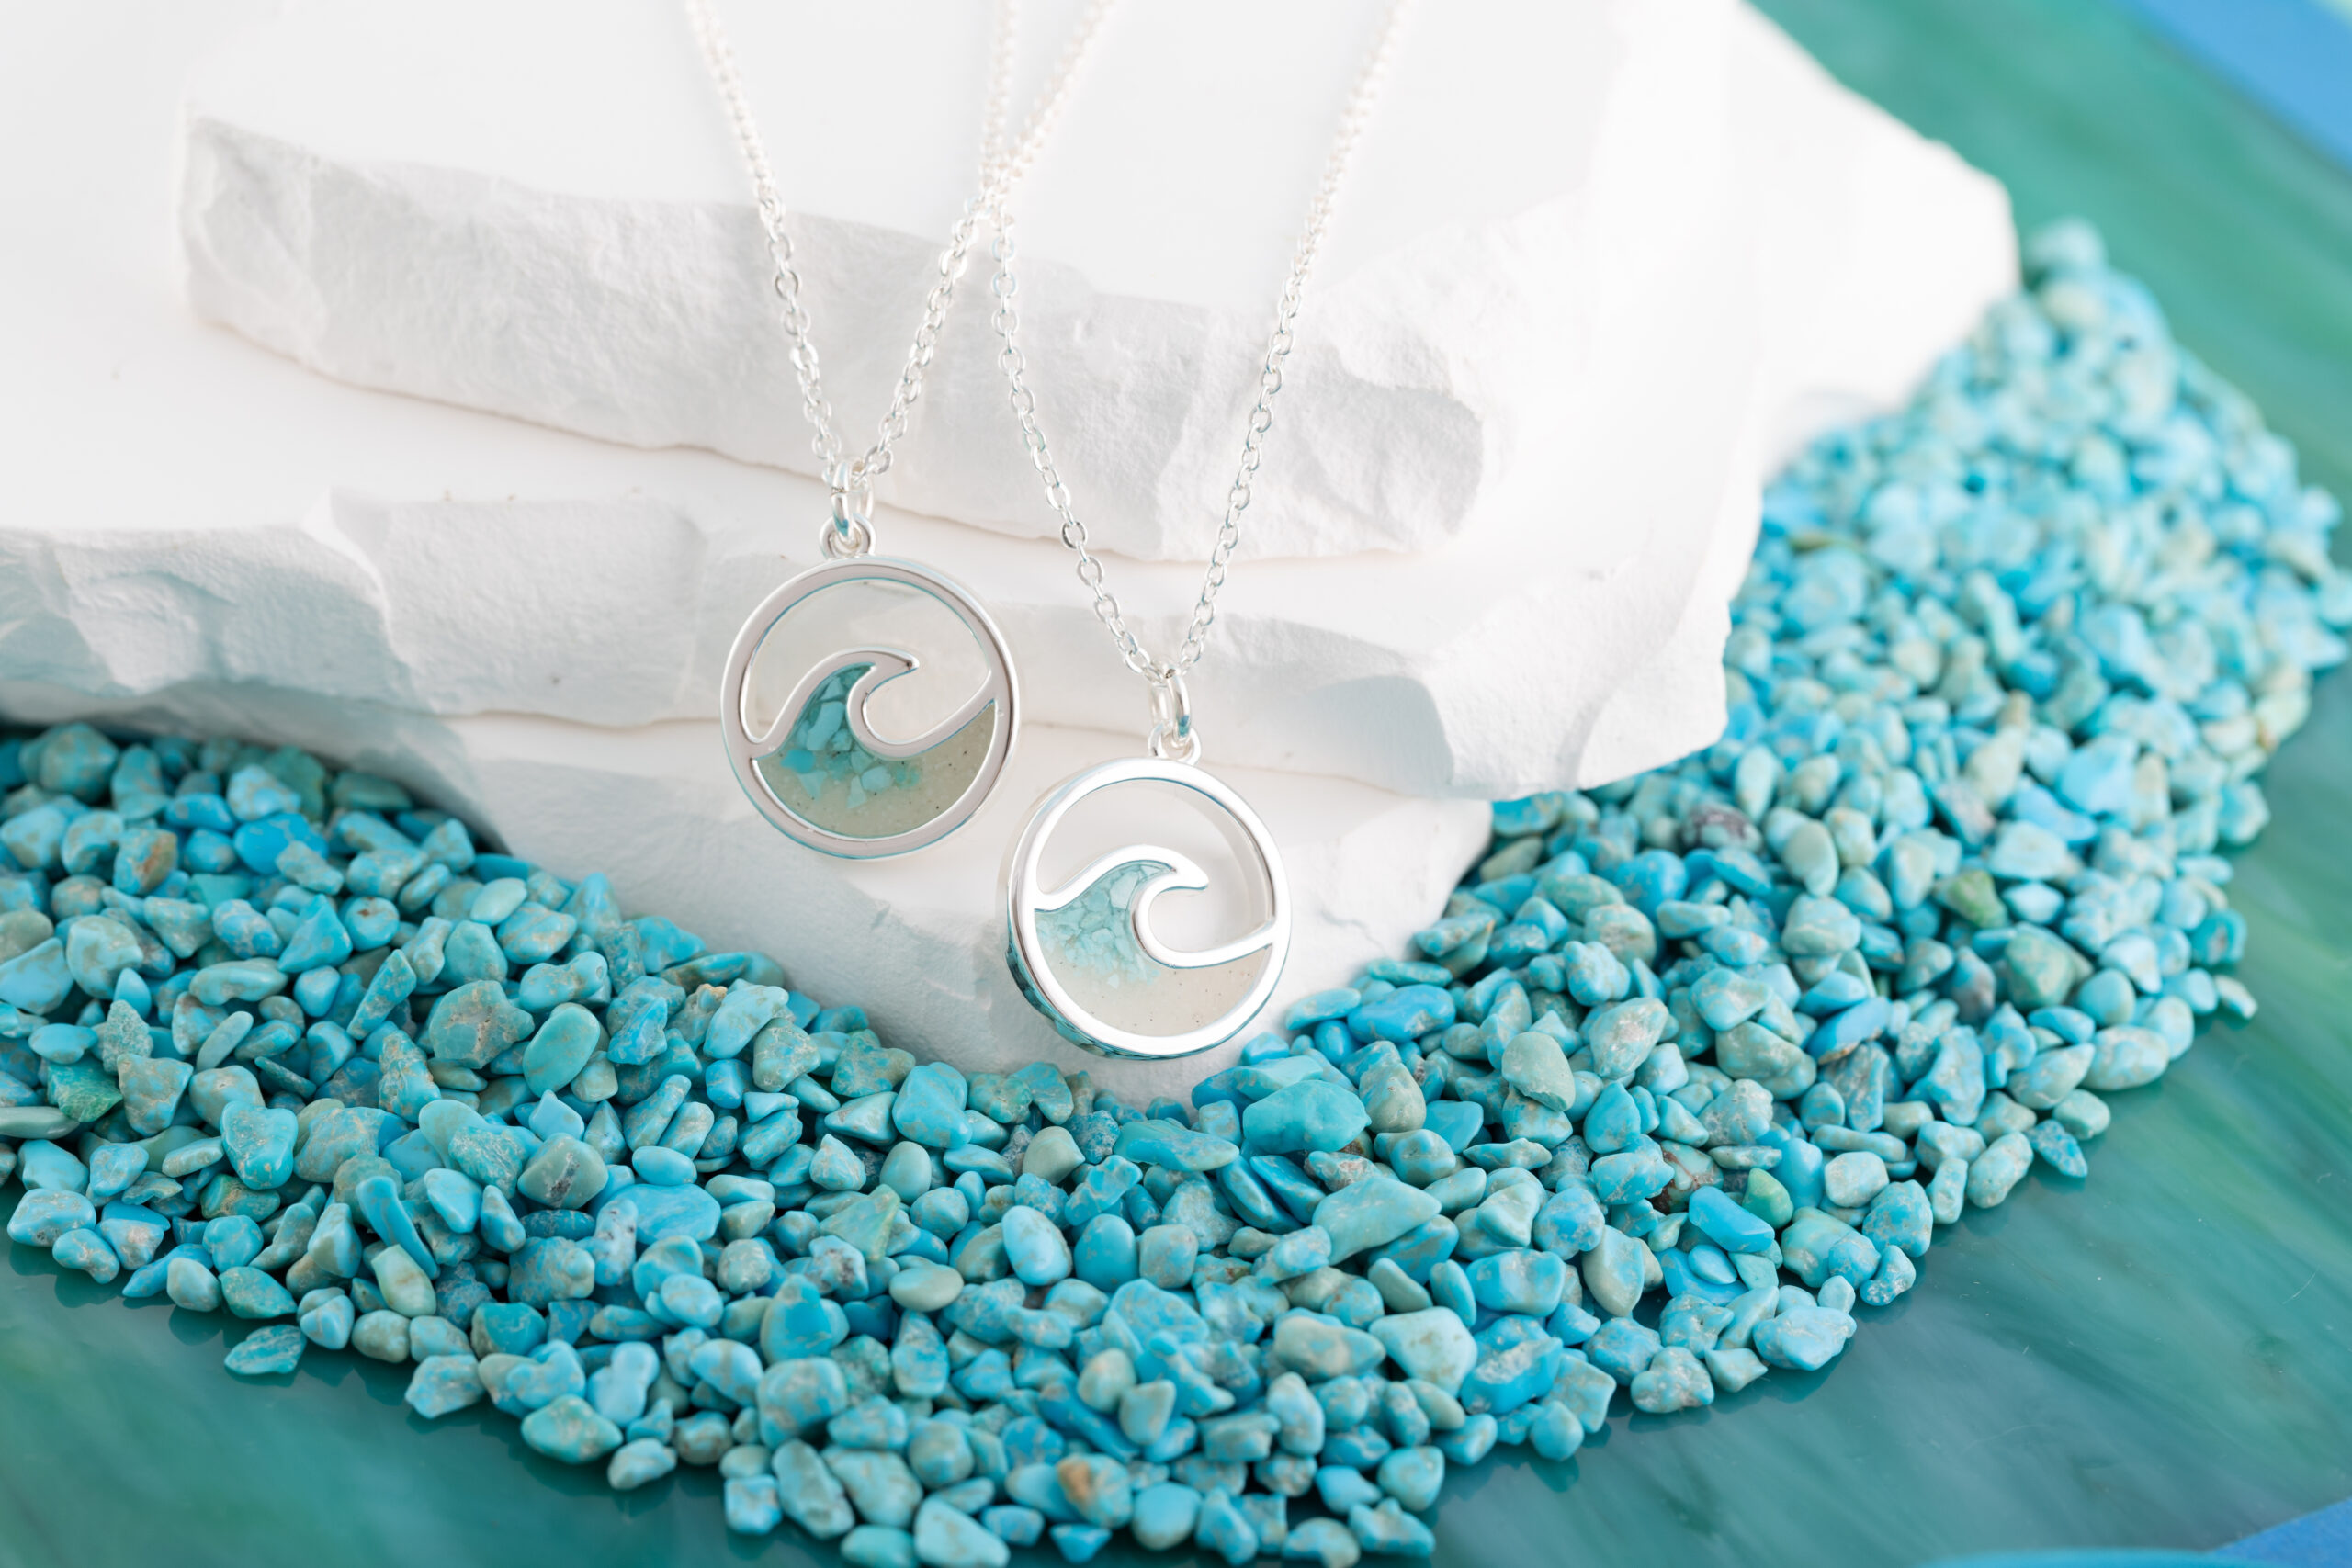 Product shot of the Cresting Wave Necklace, which comes as a free gift for those who purchase select items during giving week.